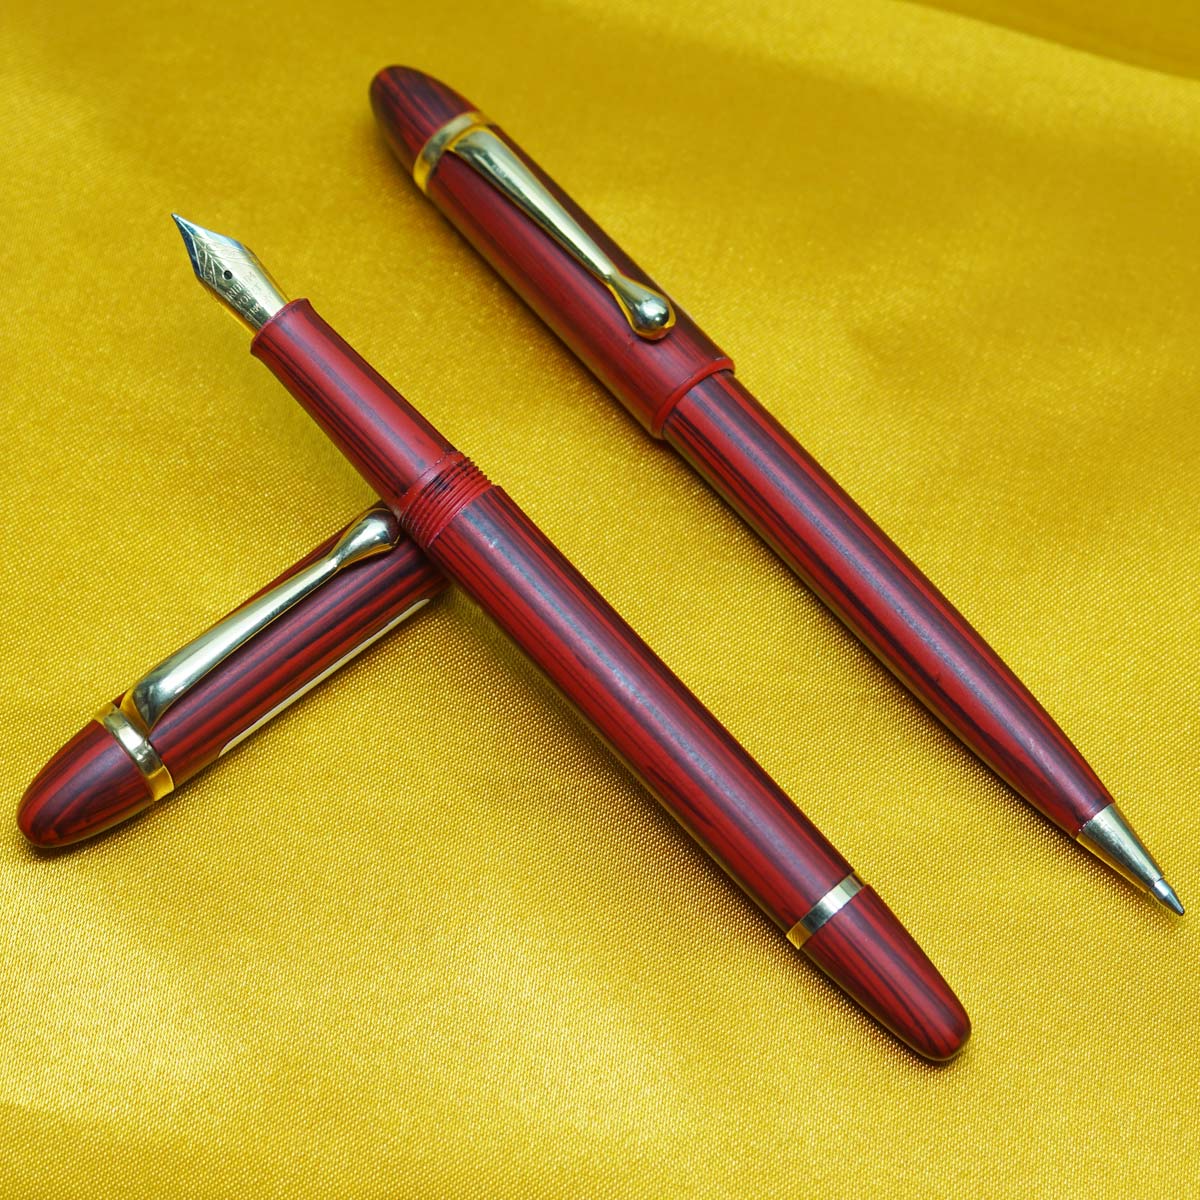 Gama - 25 - Red Color Finish Body and Cap with Gold Trims - Eye Dropper Model Fountain Pen and Ball Pen Set SKU 22211